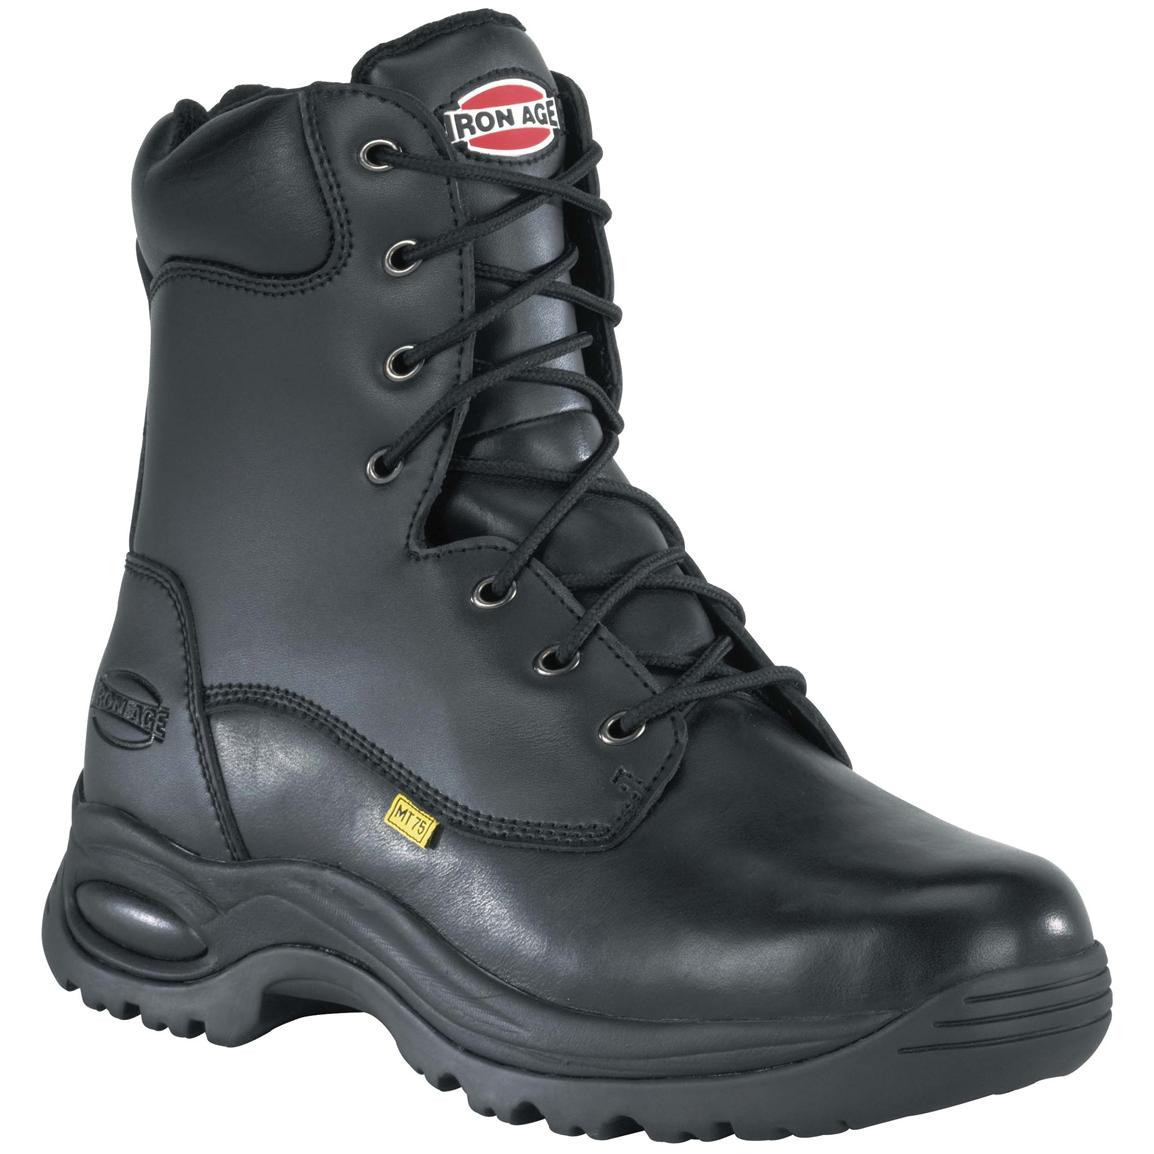 reliable work boots